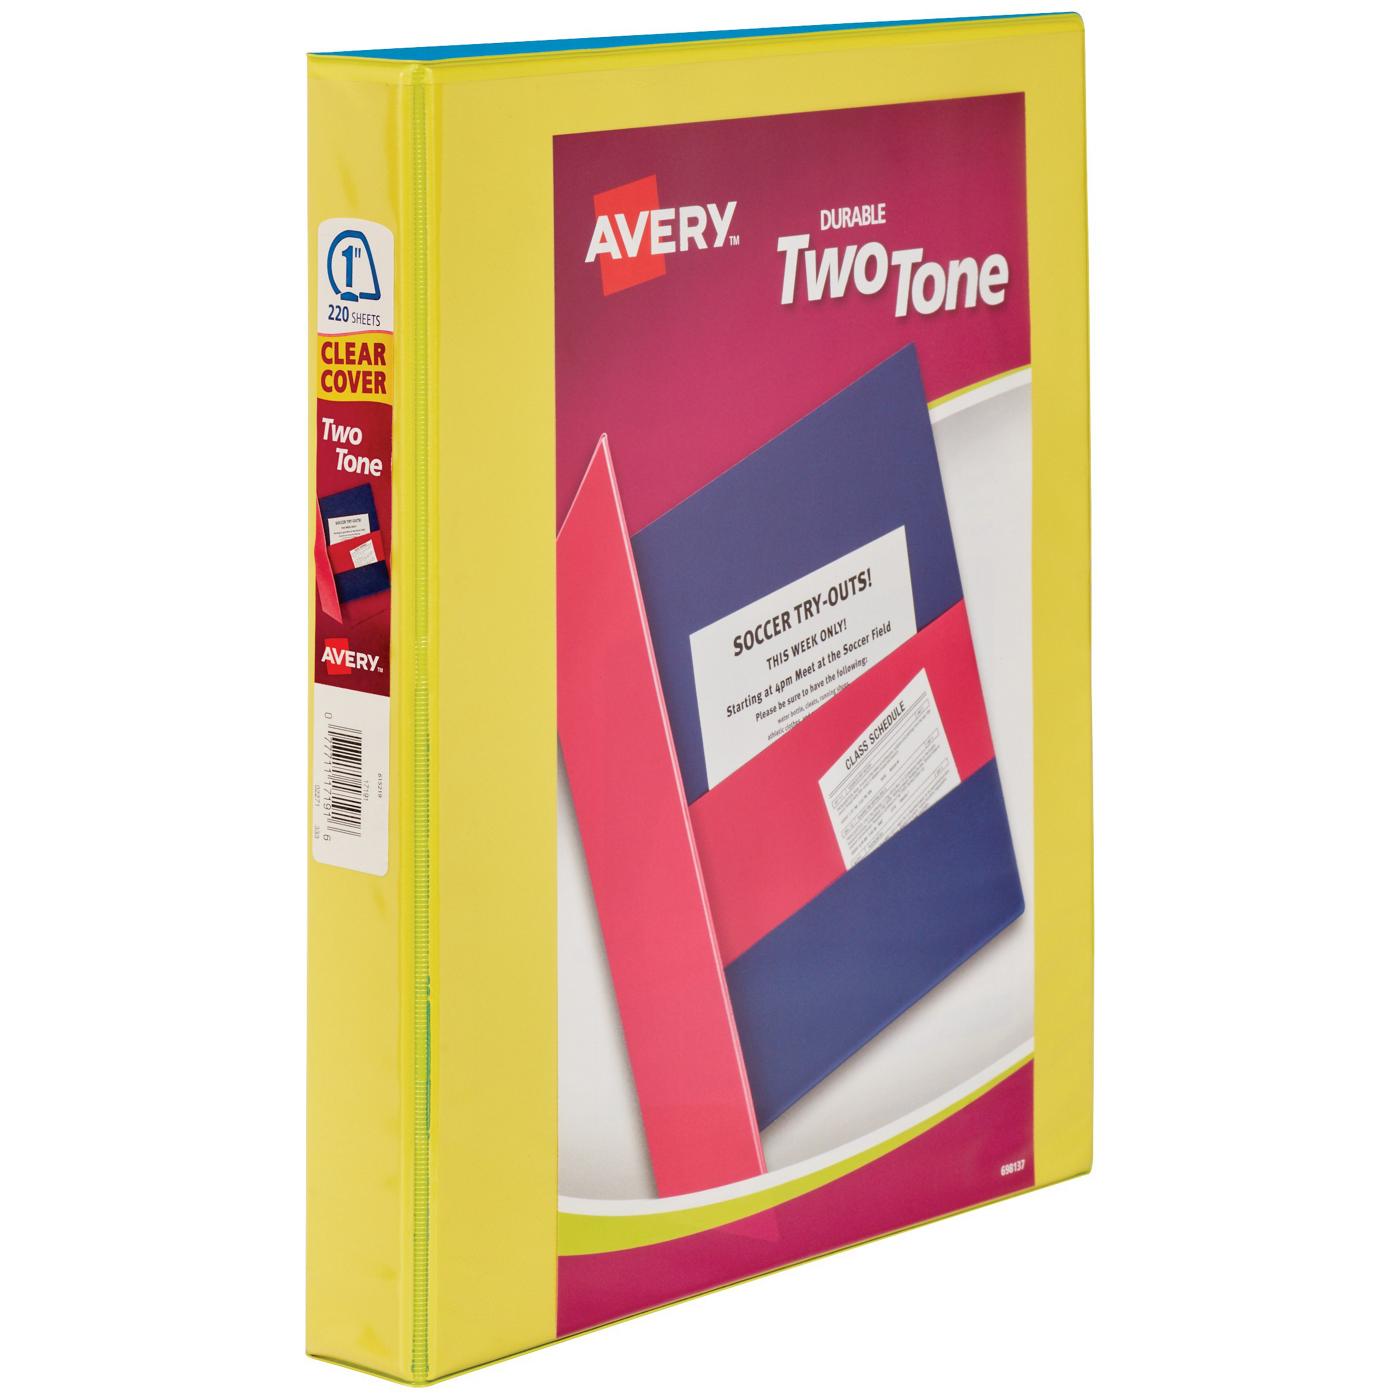 Avery Durable Binder Two Tone Assortment; image 2 of 3